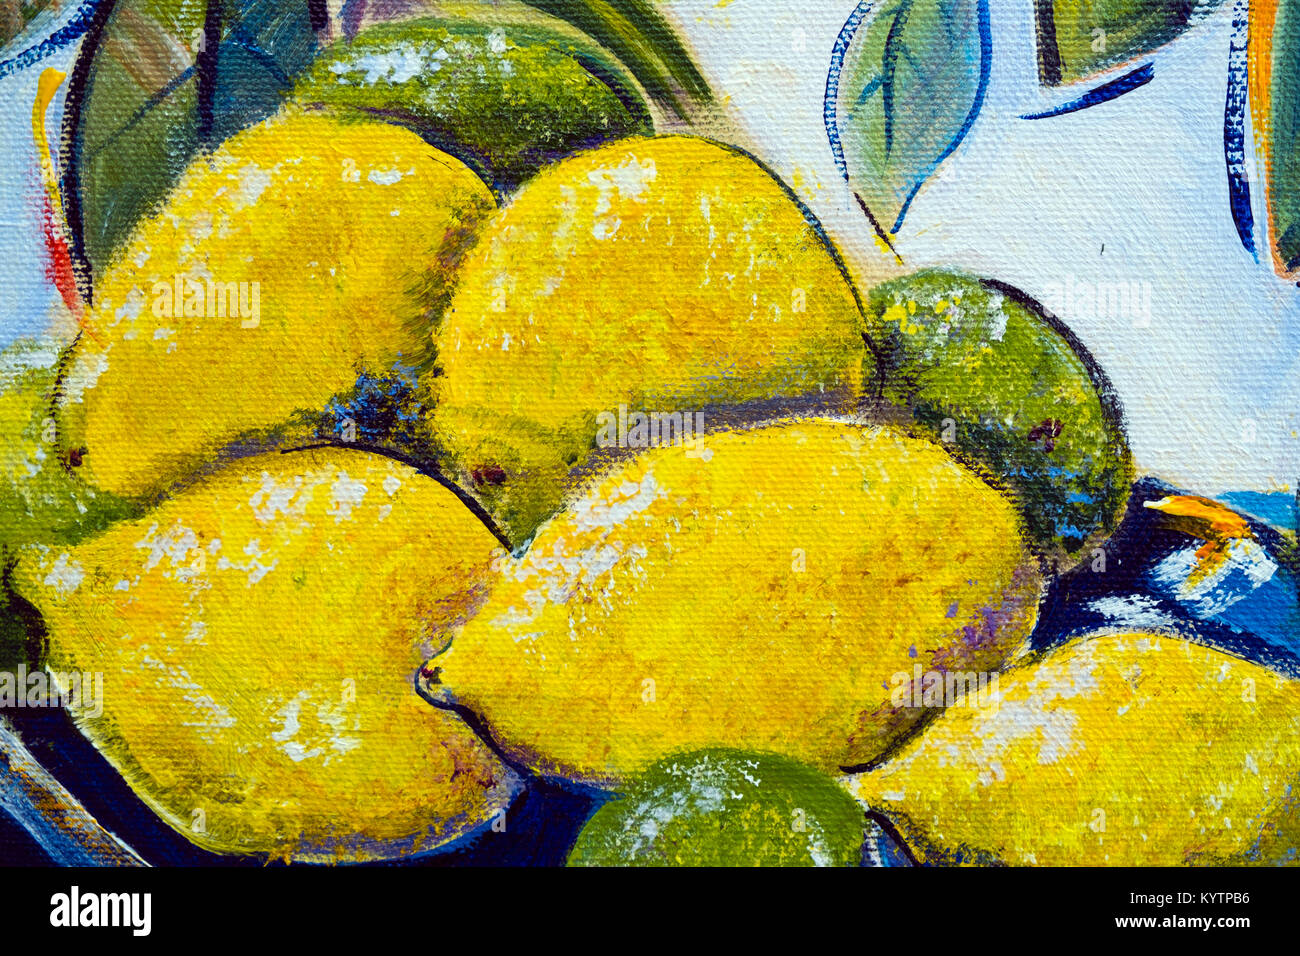 Vibrant multi-colored original oil painting close up detail showing brushwork and canvas textures - lemons Stock Photo